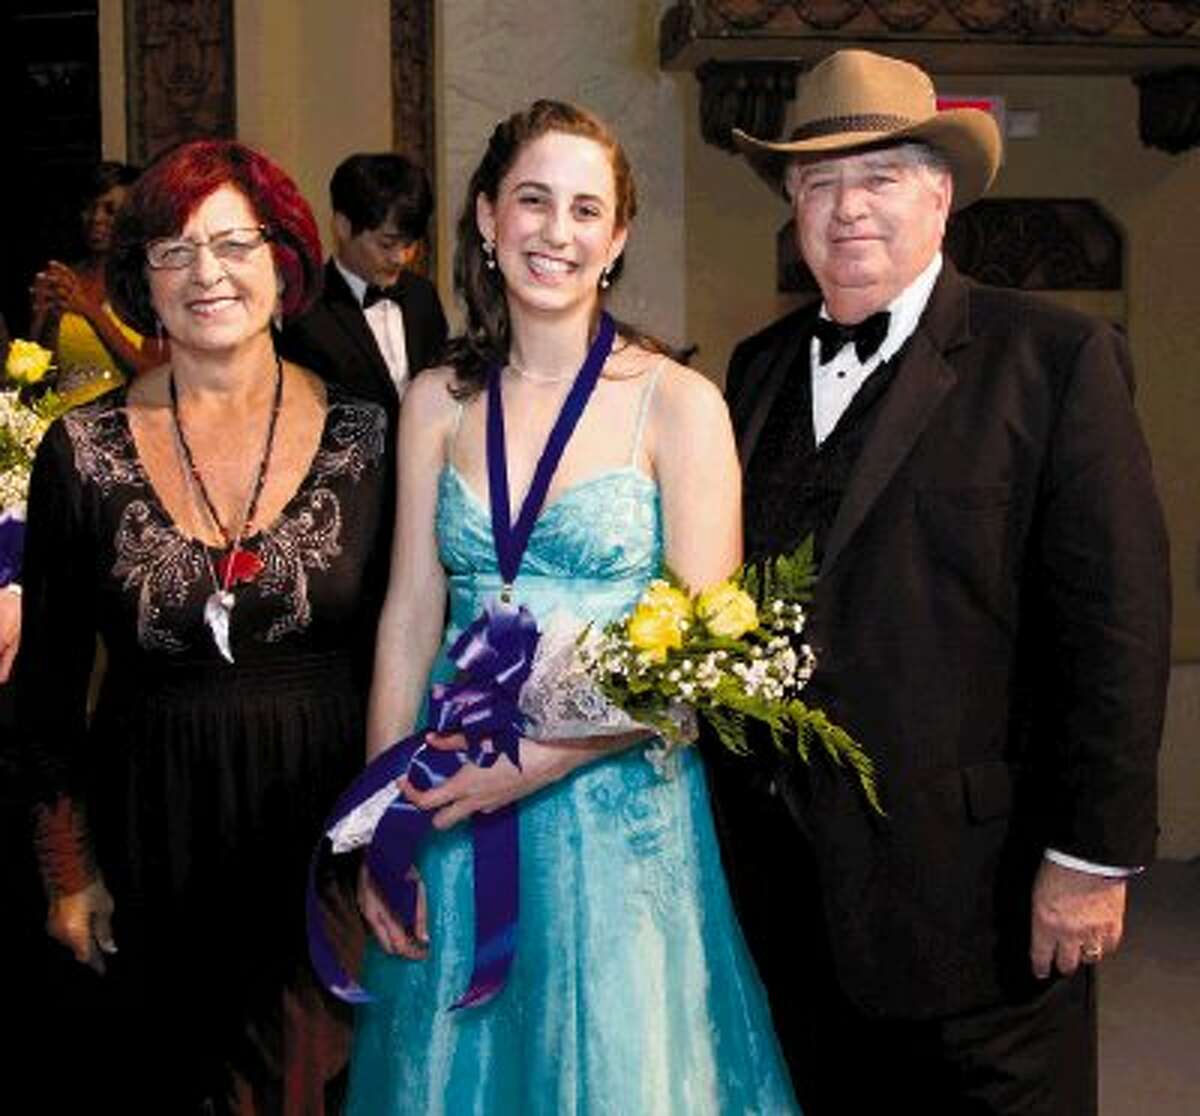 Competition Co-chair Marge Hayward with Strings Gold Medal winner Emma Hoeft and Competition Co-chair Steve Hayward.